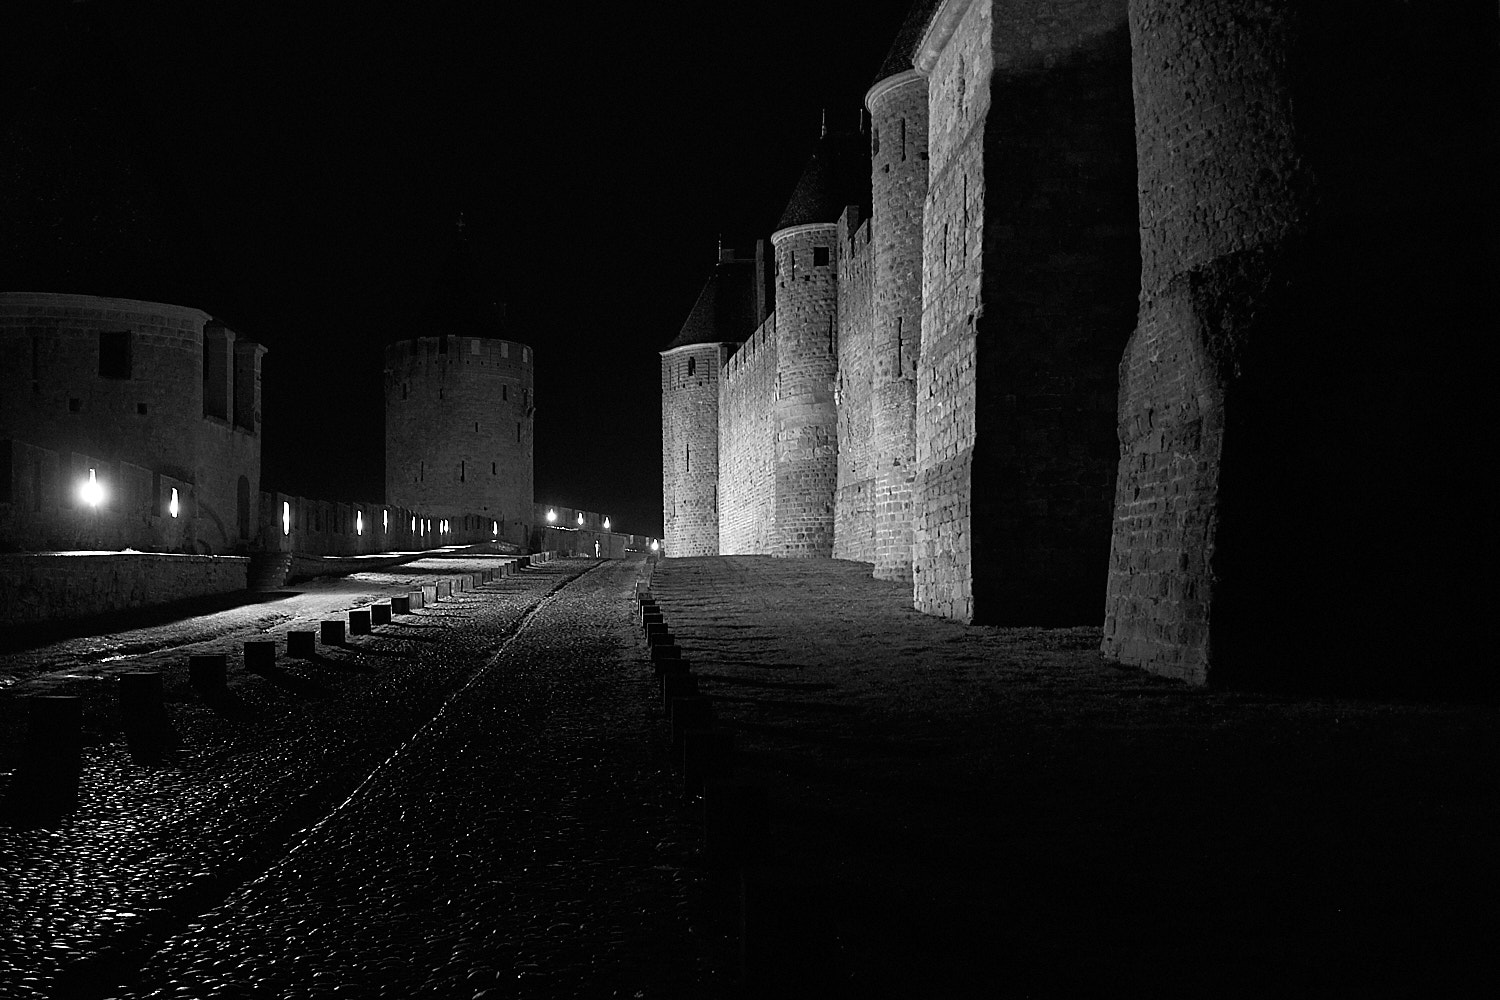 Night view of the walls of the fortress city of Carcassone in south France